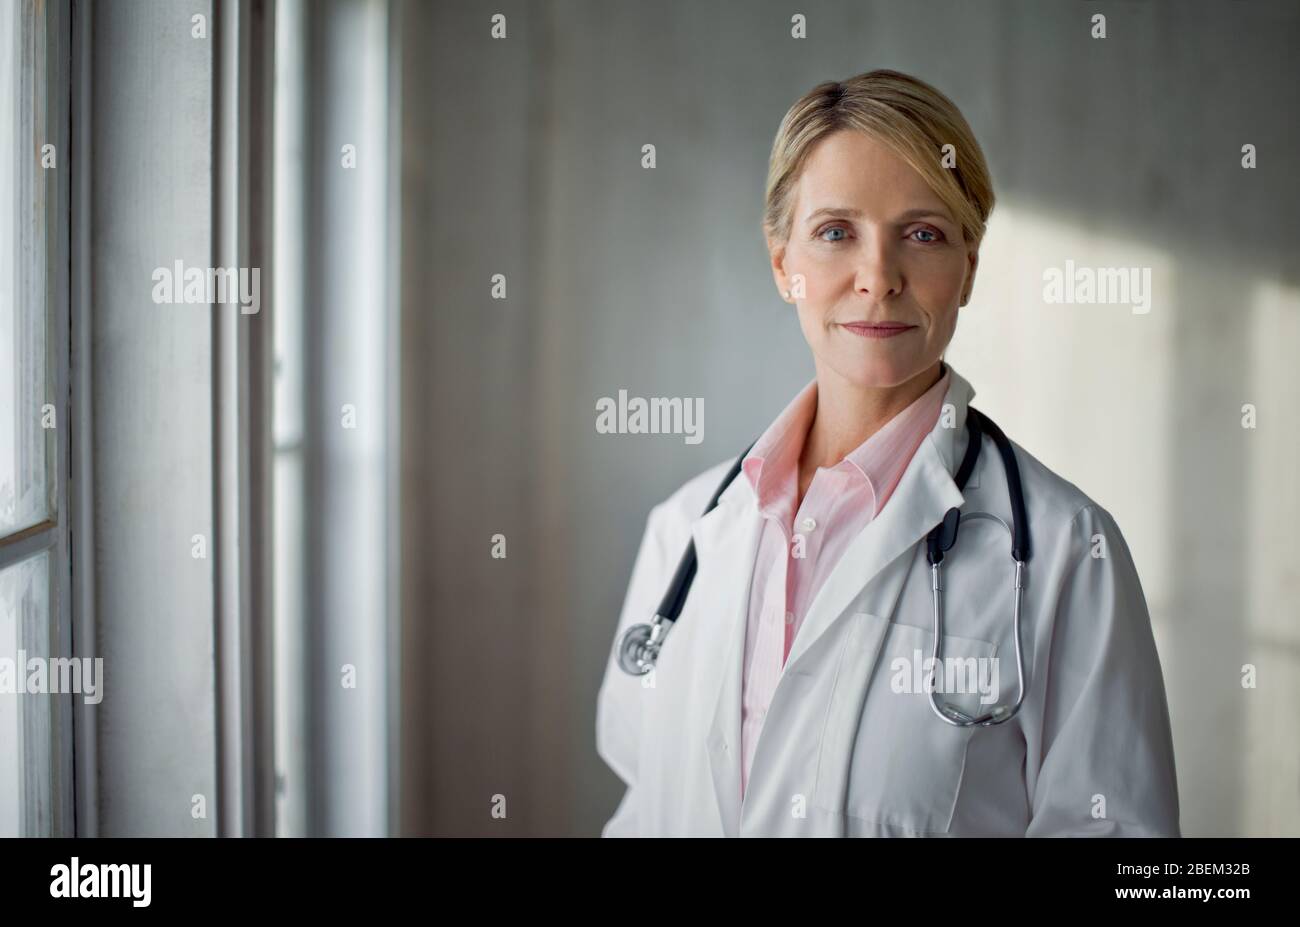 Portrait of a mid adult female doctor Stock Photo